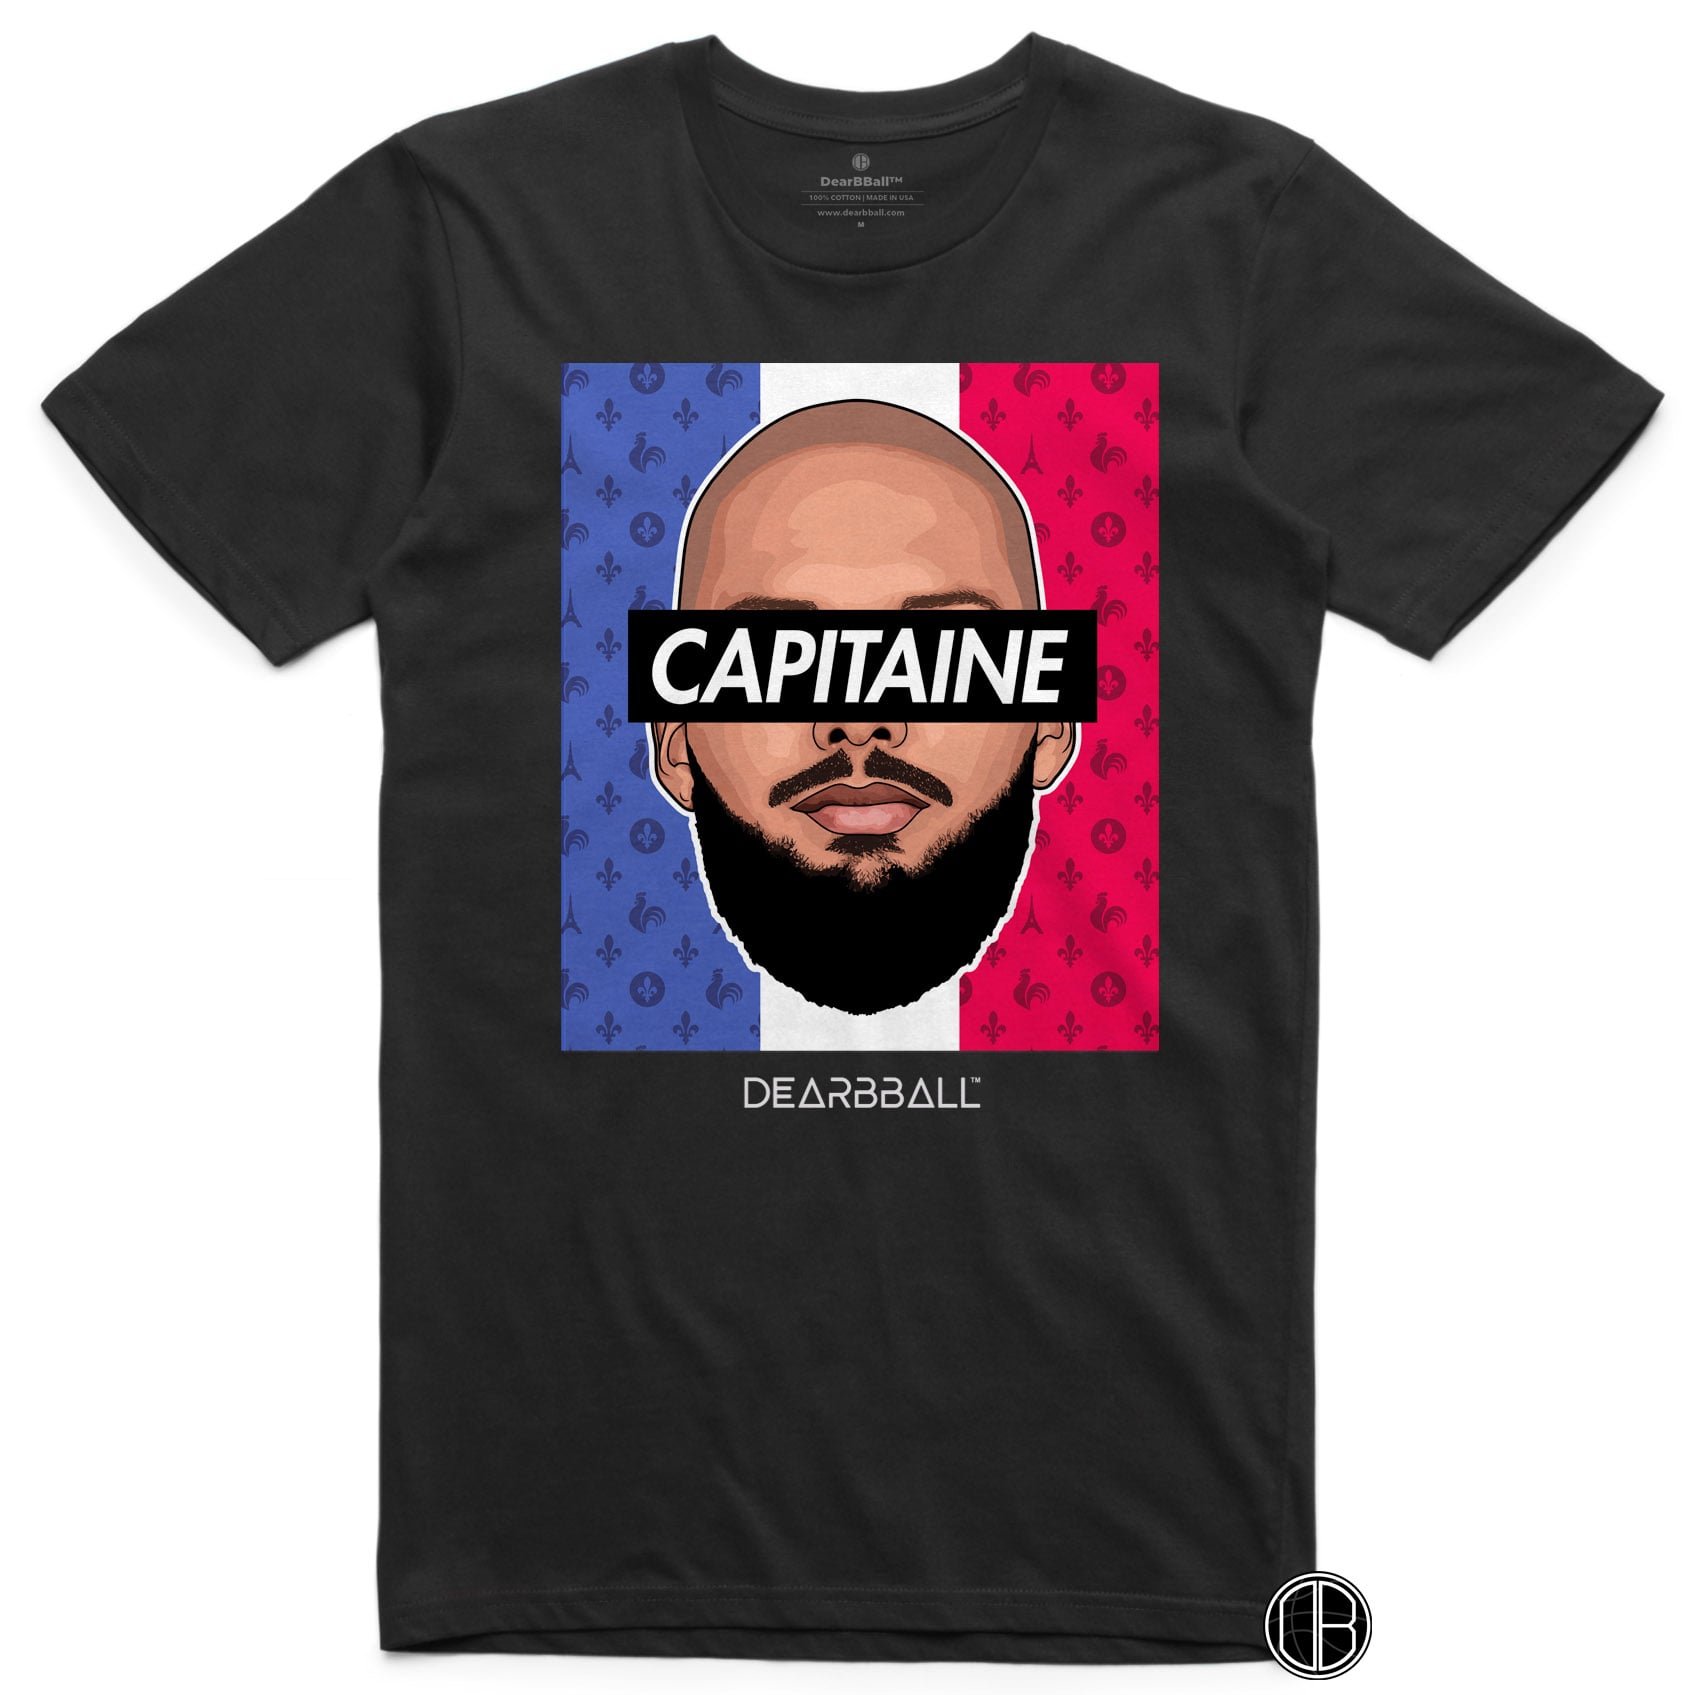 DearBBall T-Shirt - CAPITAINE Emblemes France Edition